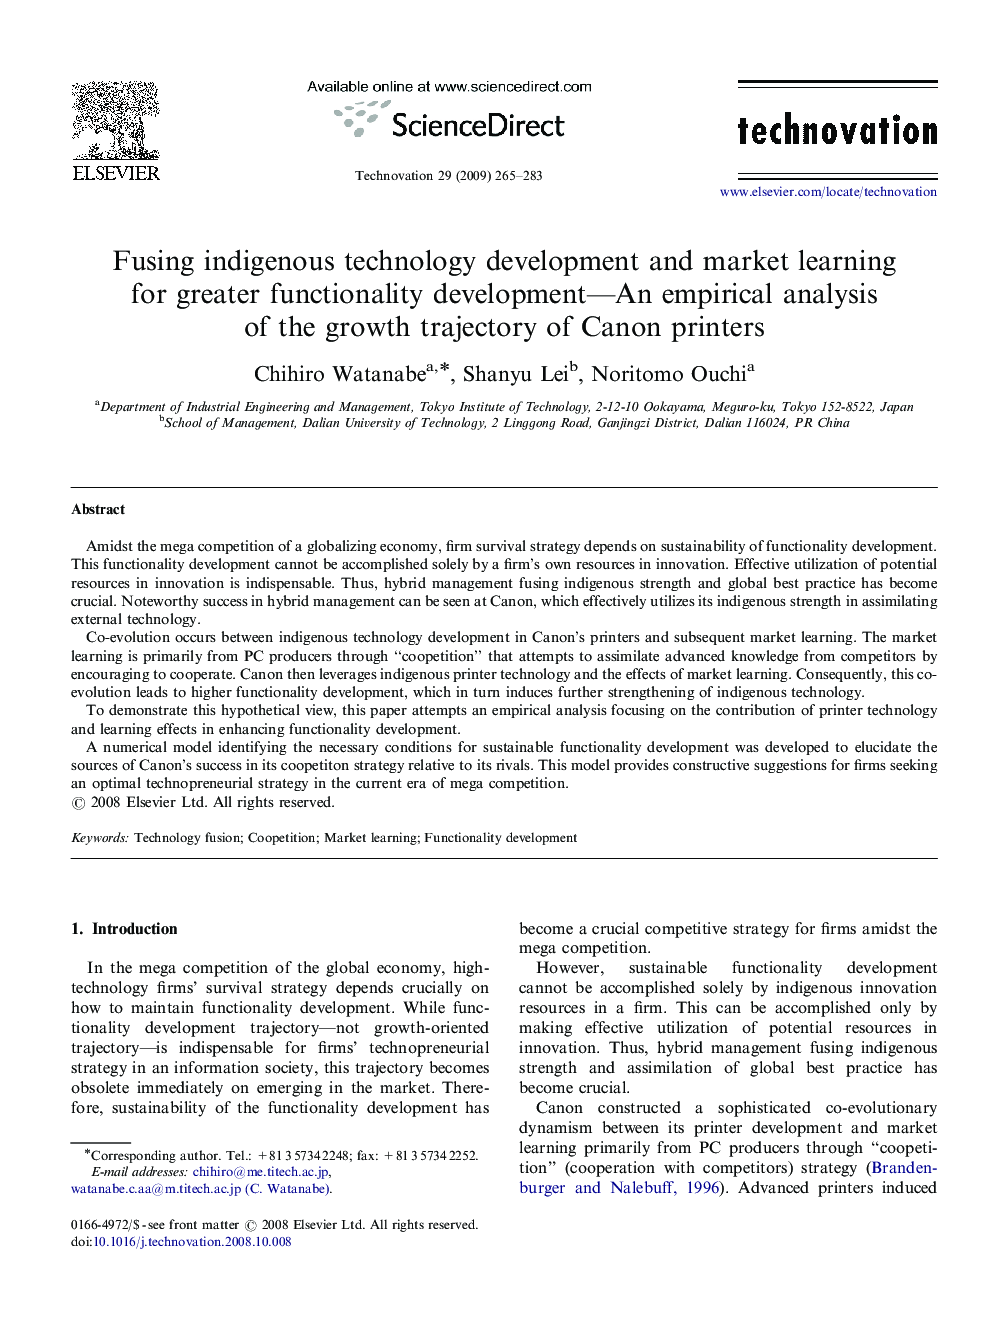 Fusing indigenous technology development and market learning for greater functionality development—An empirical analysis of the growth trajectory of Canon printers